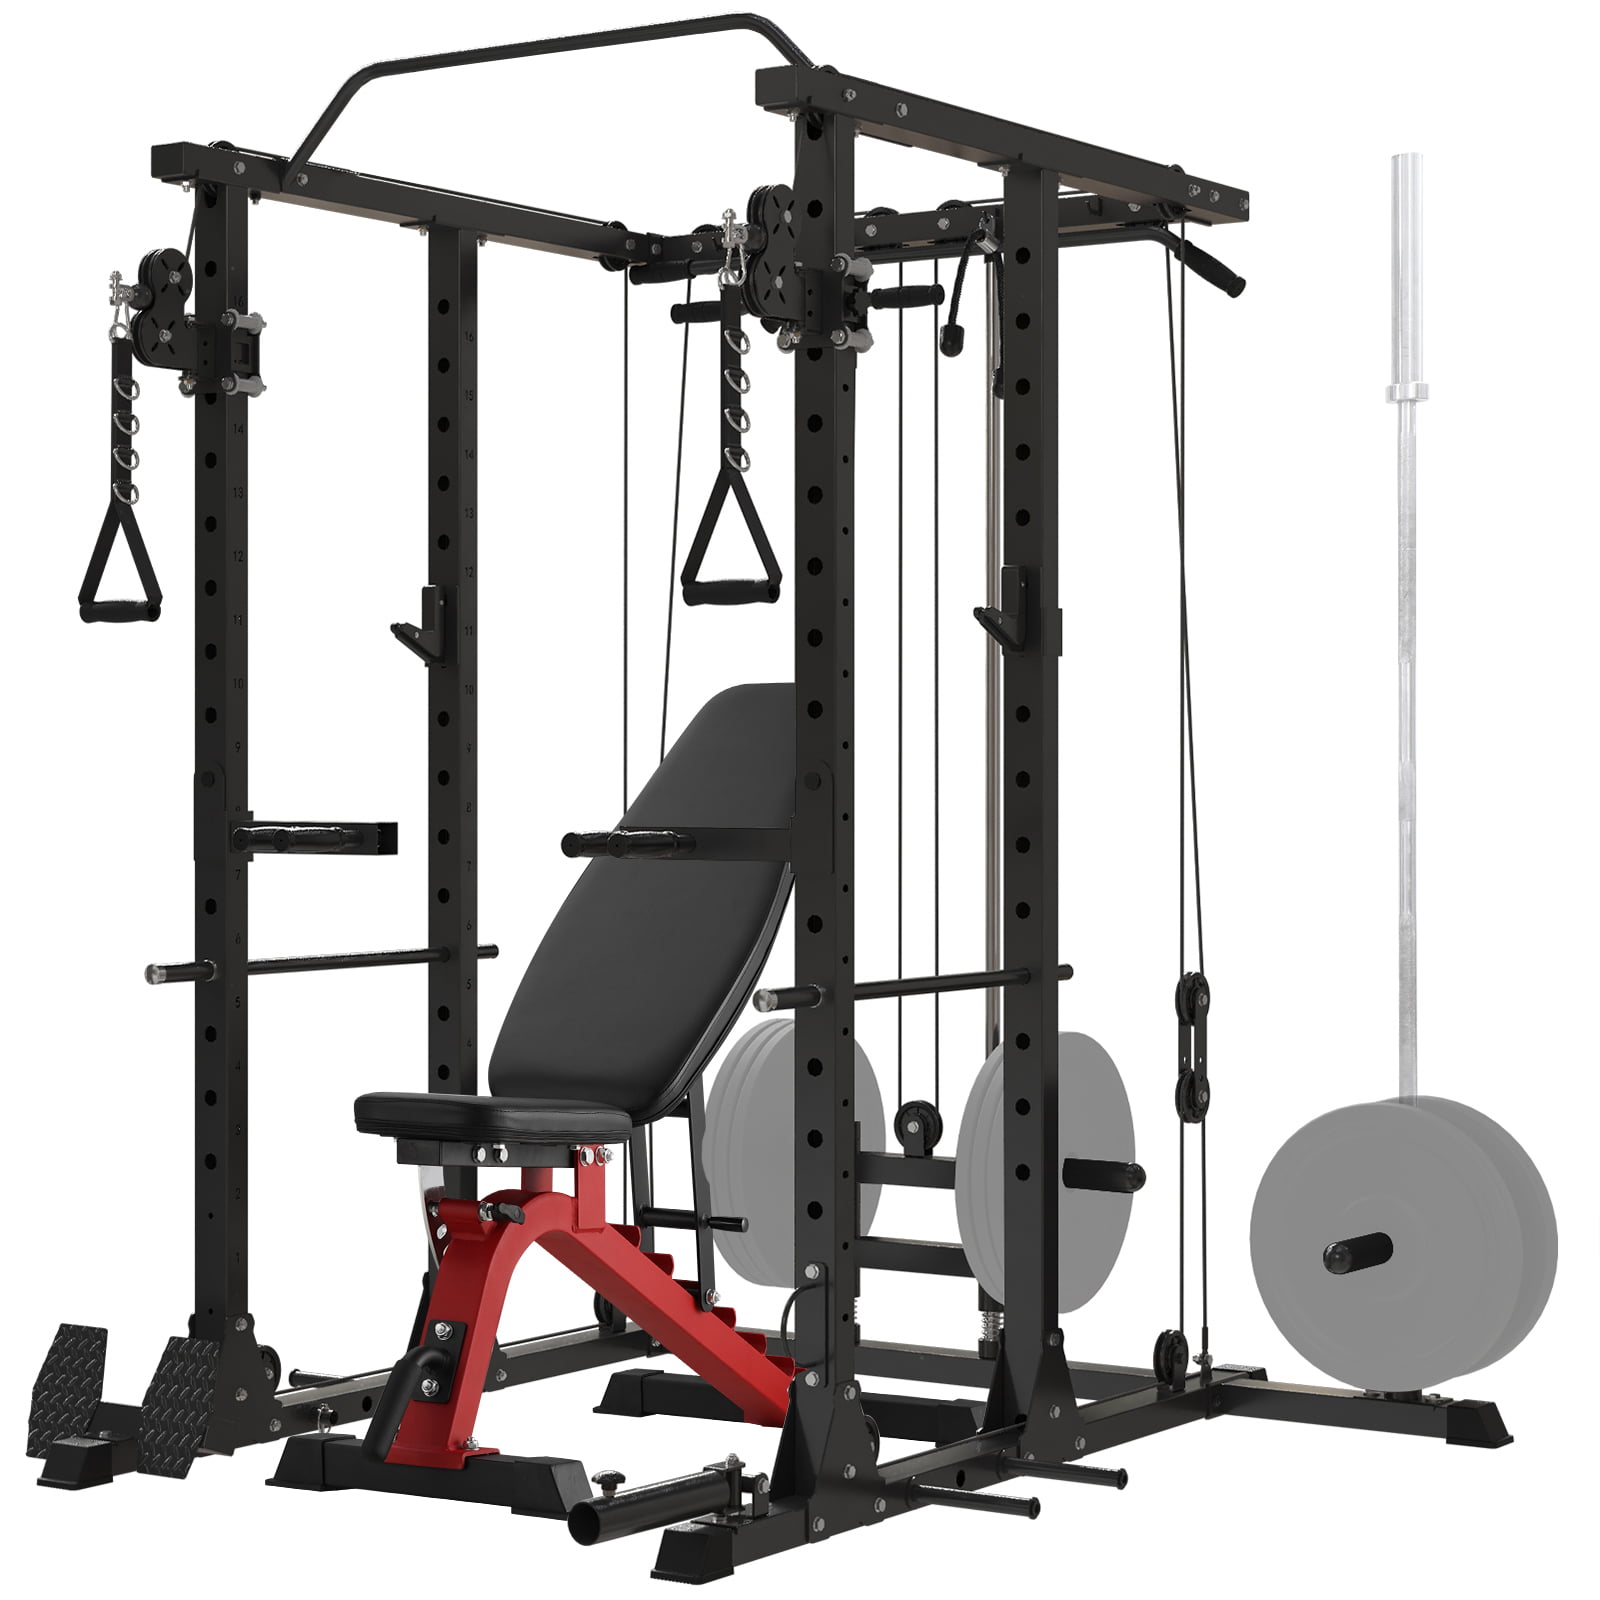 Mikolo Power Rack Cage, 1500LBS Weight Cage with 800LB Capacity Adjustable Weight Bench, Multi-Function Workout Rack Cage with Storage System, J-Hook, Band Peg, Battle Rope Ring Home Gym - 502218577